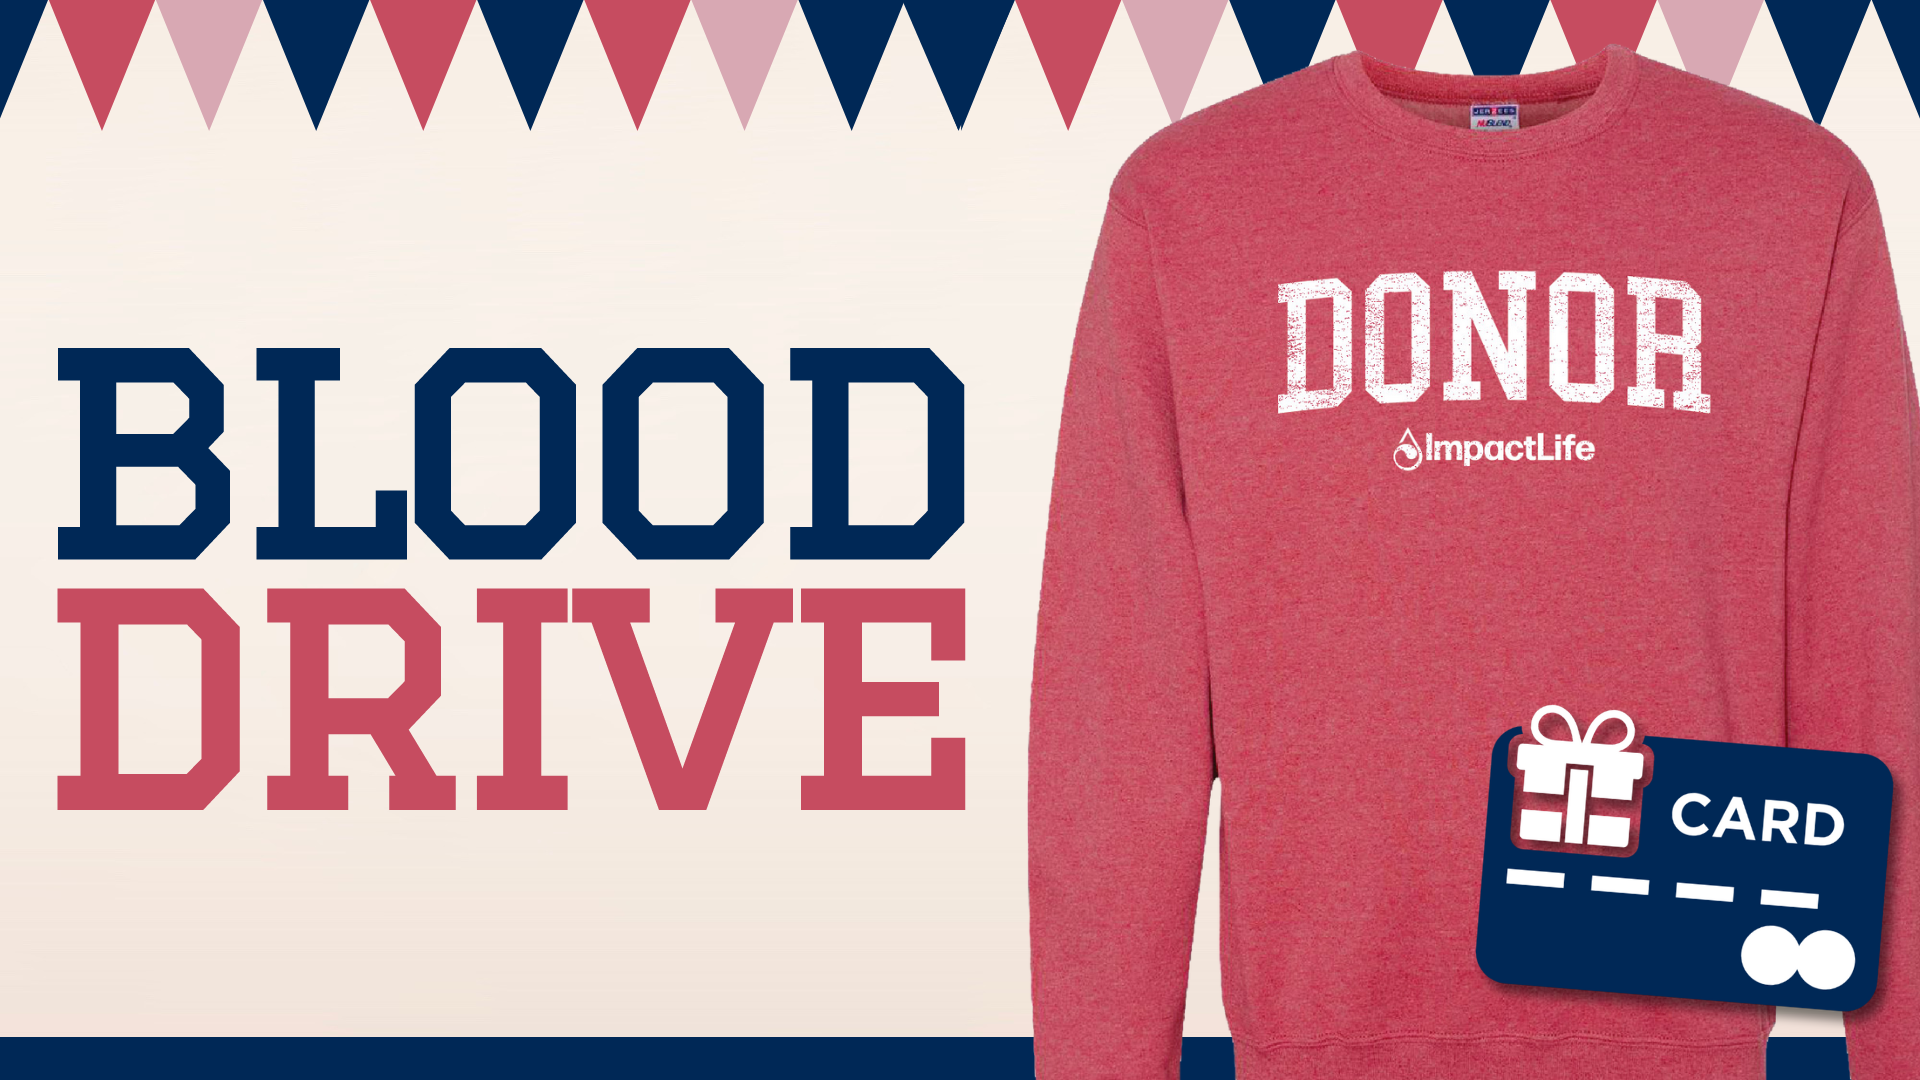 "Blood Drive" in bold letters next to a red sweatshirt that has "Donor" written in white across the chest.